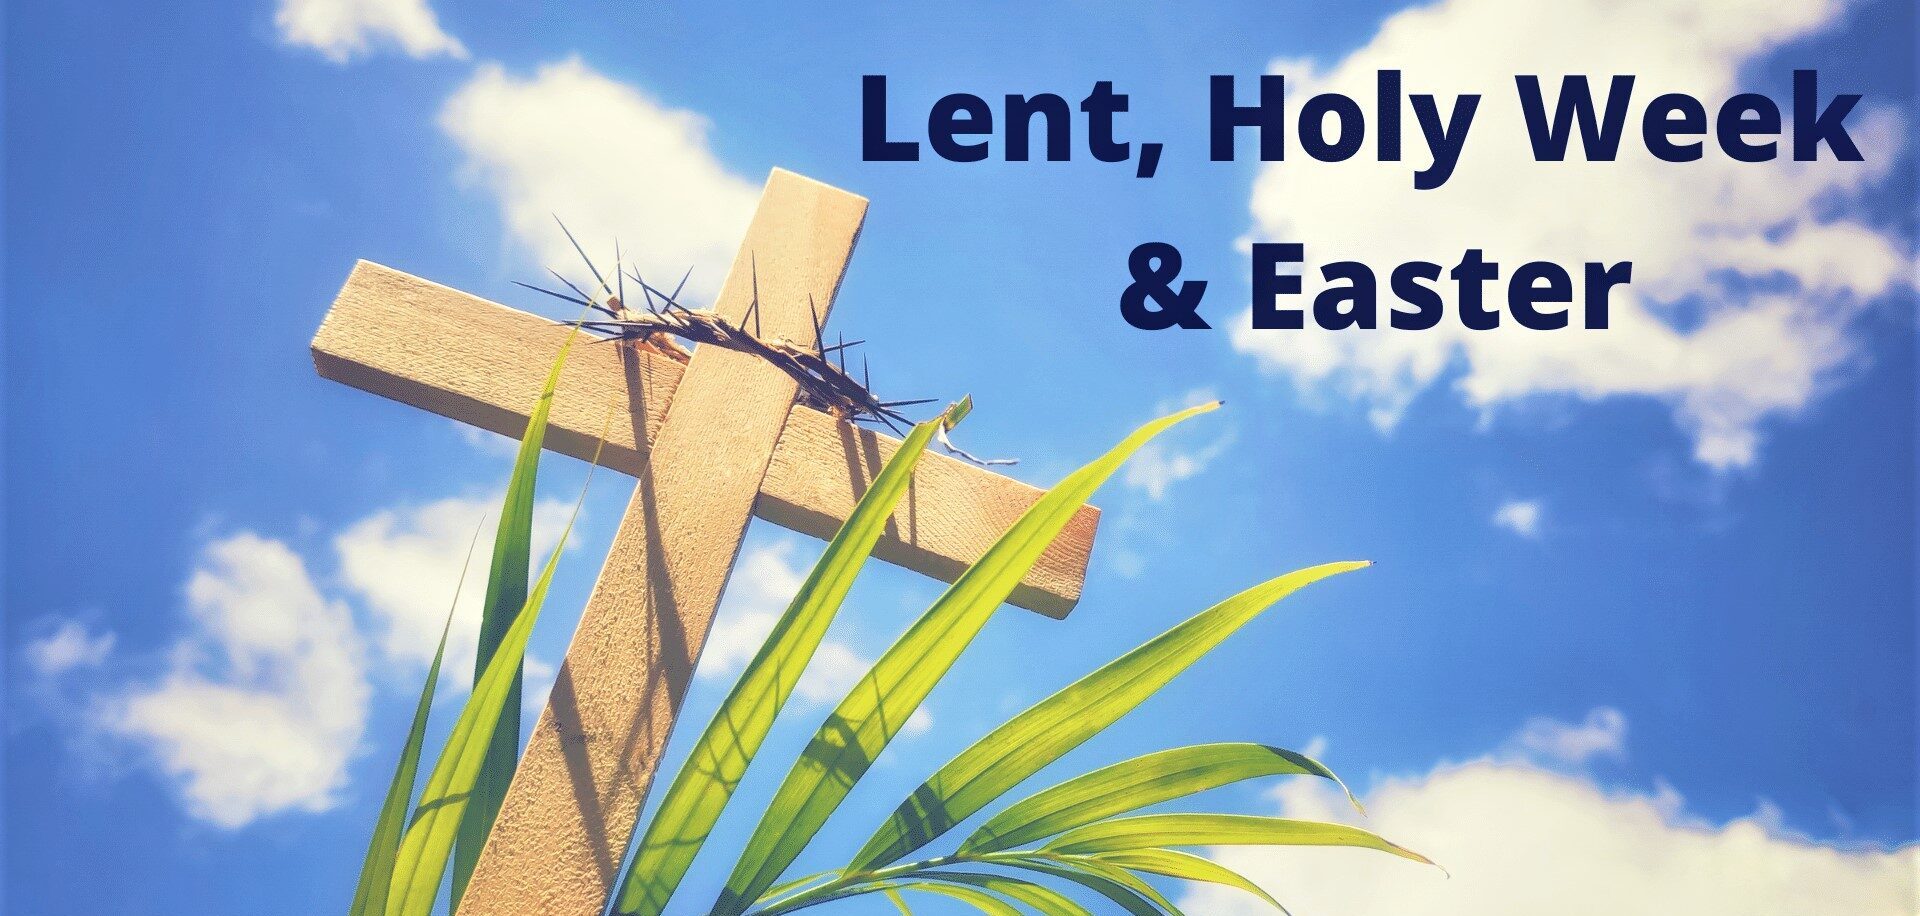 Lent, Holy Week and Easter - Our Saviour Lutheran Church